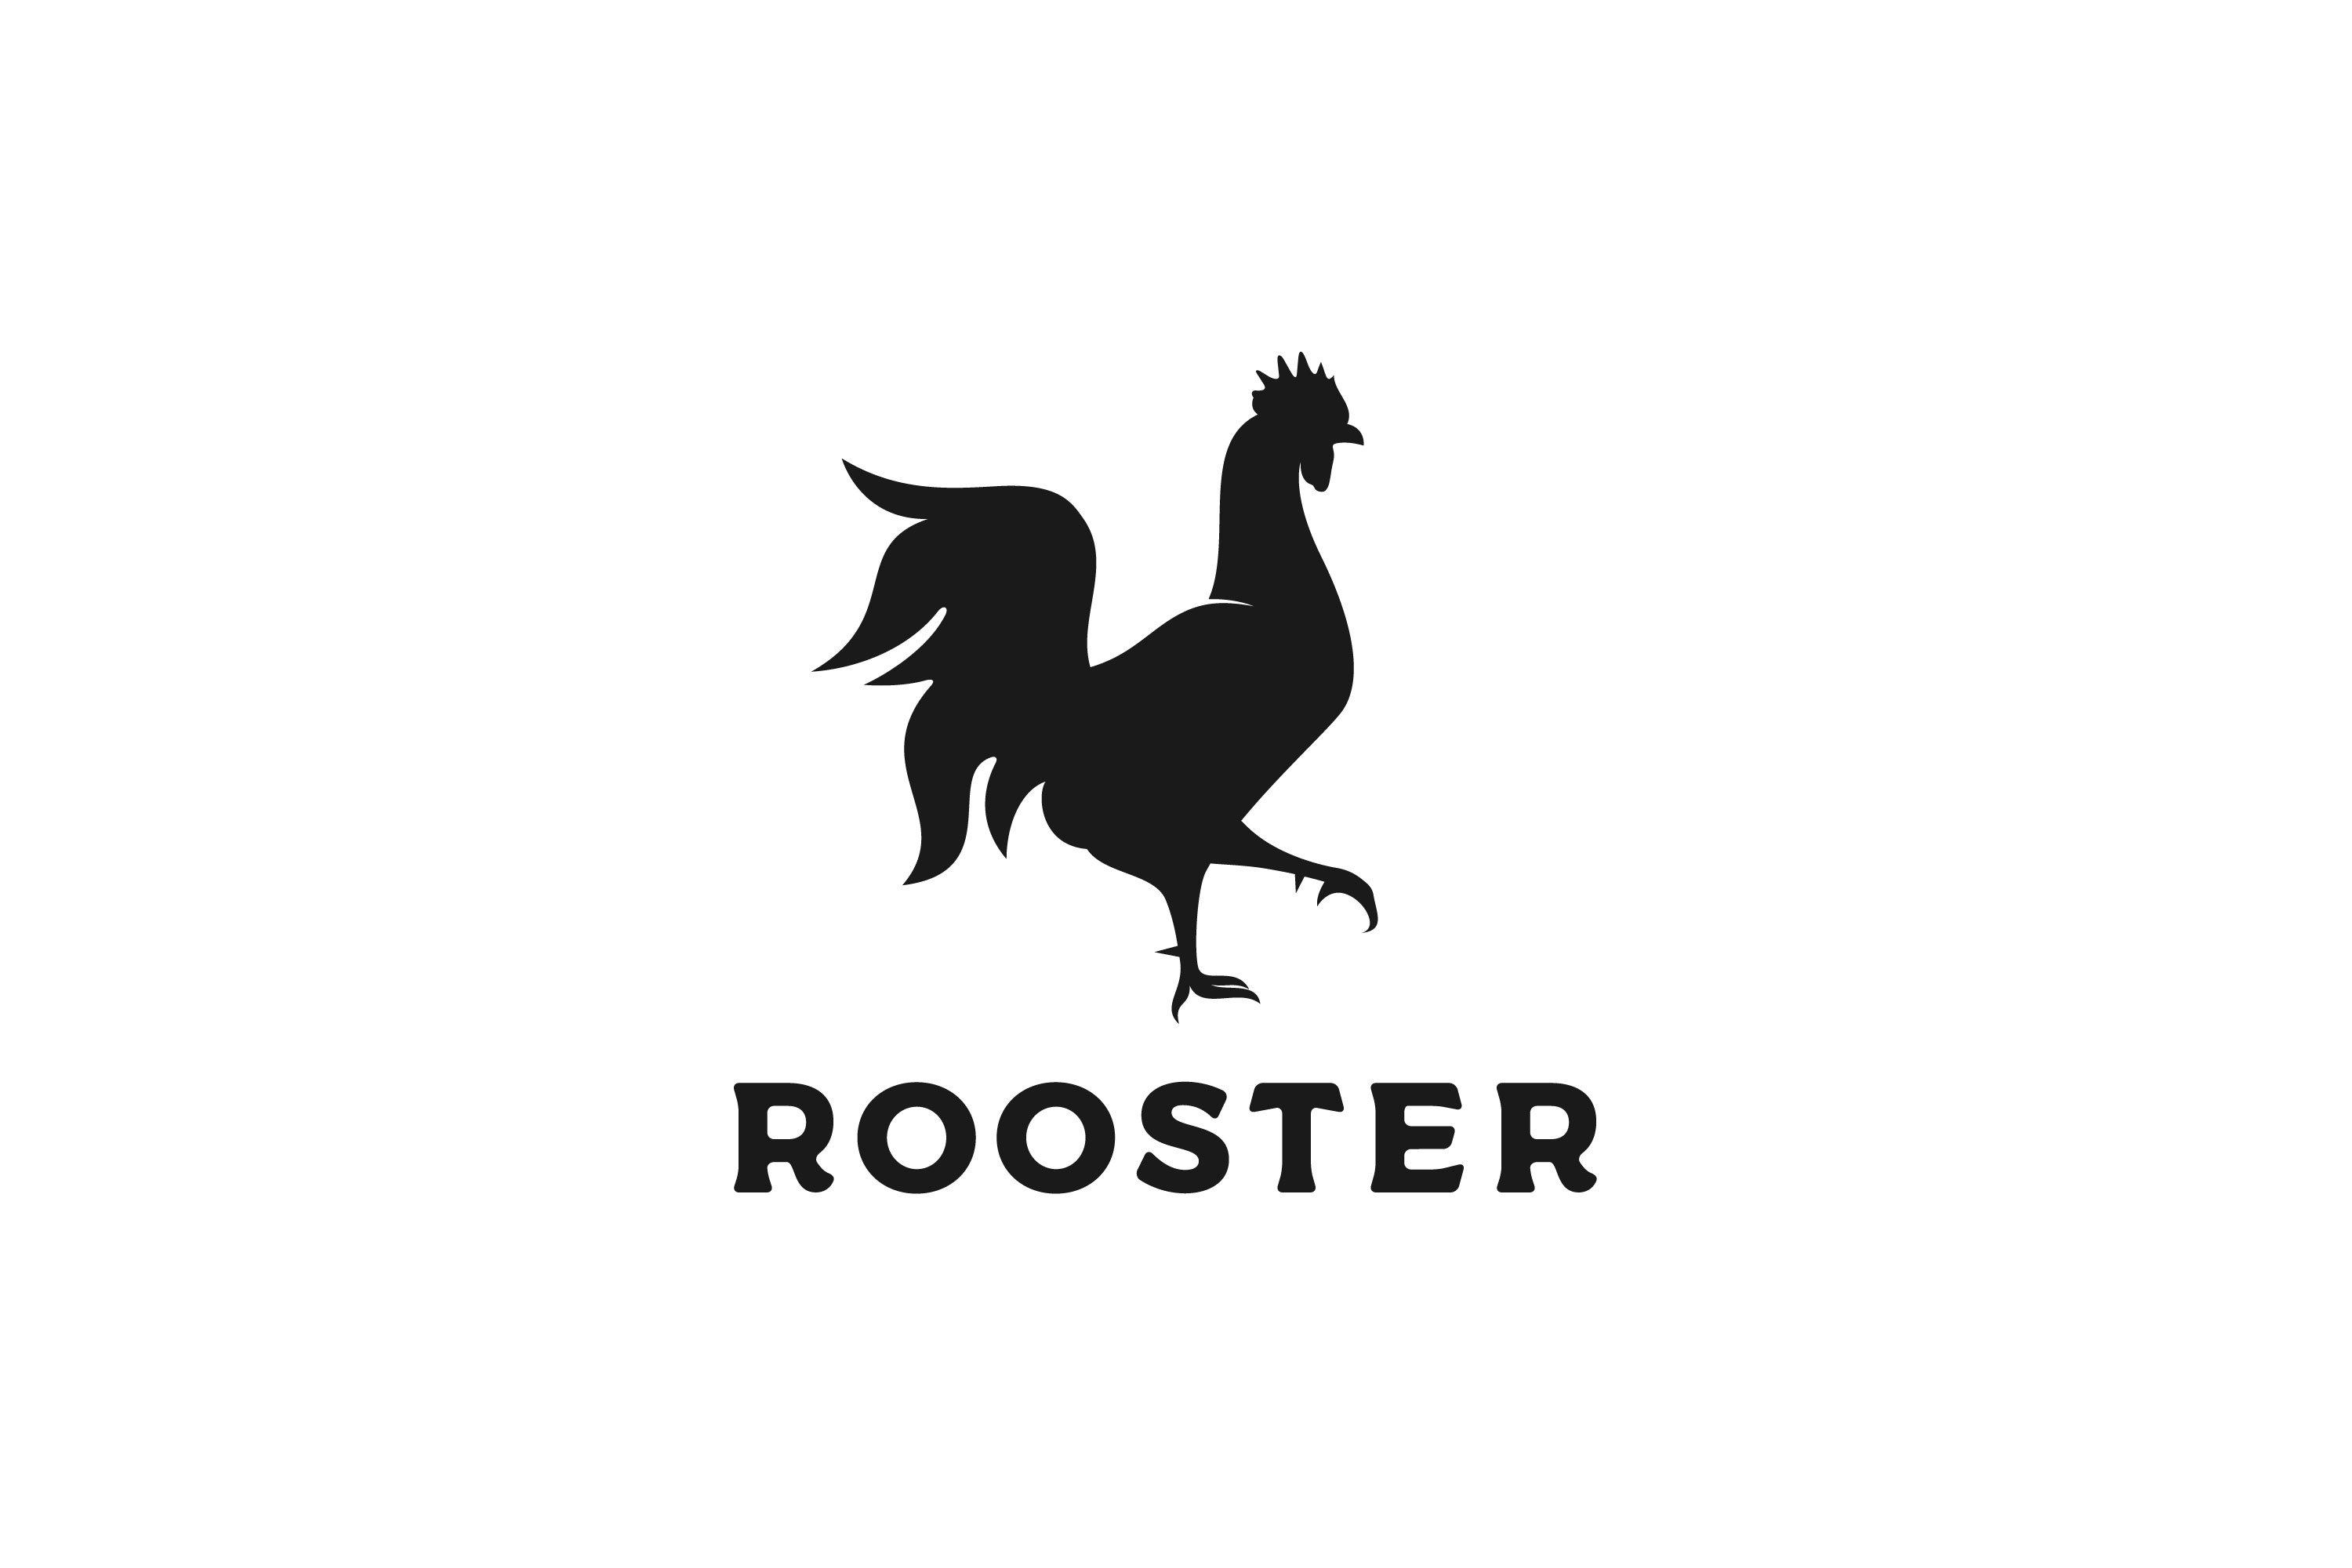 Rooster, chicken silhouette logo cover image.